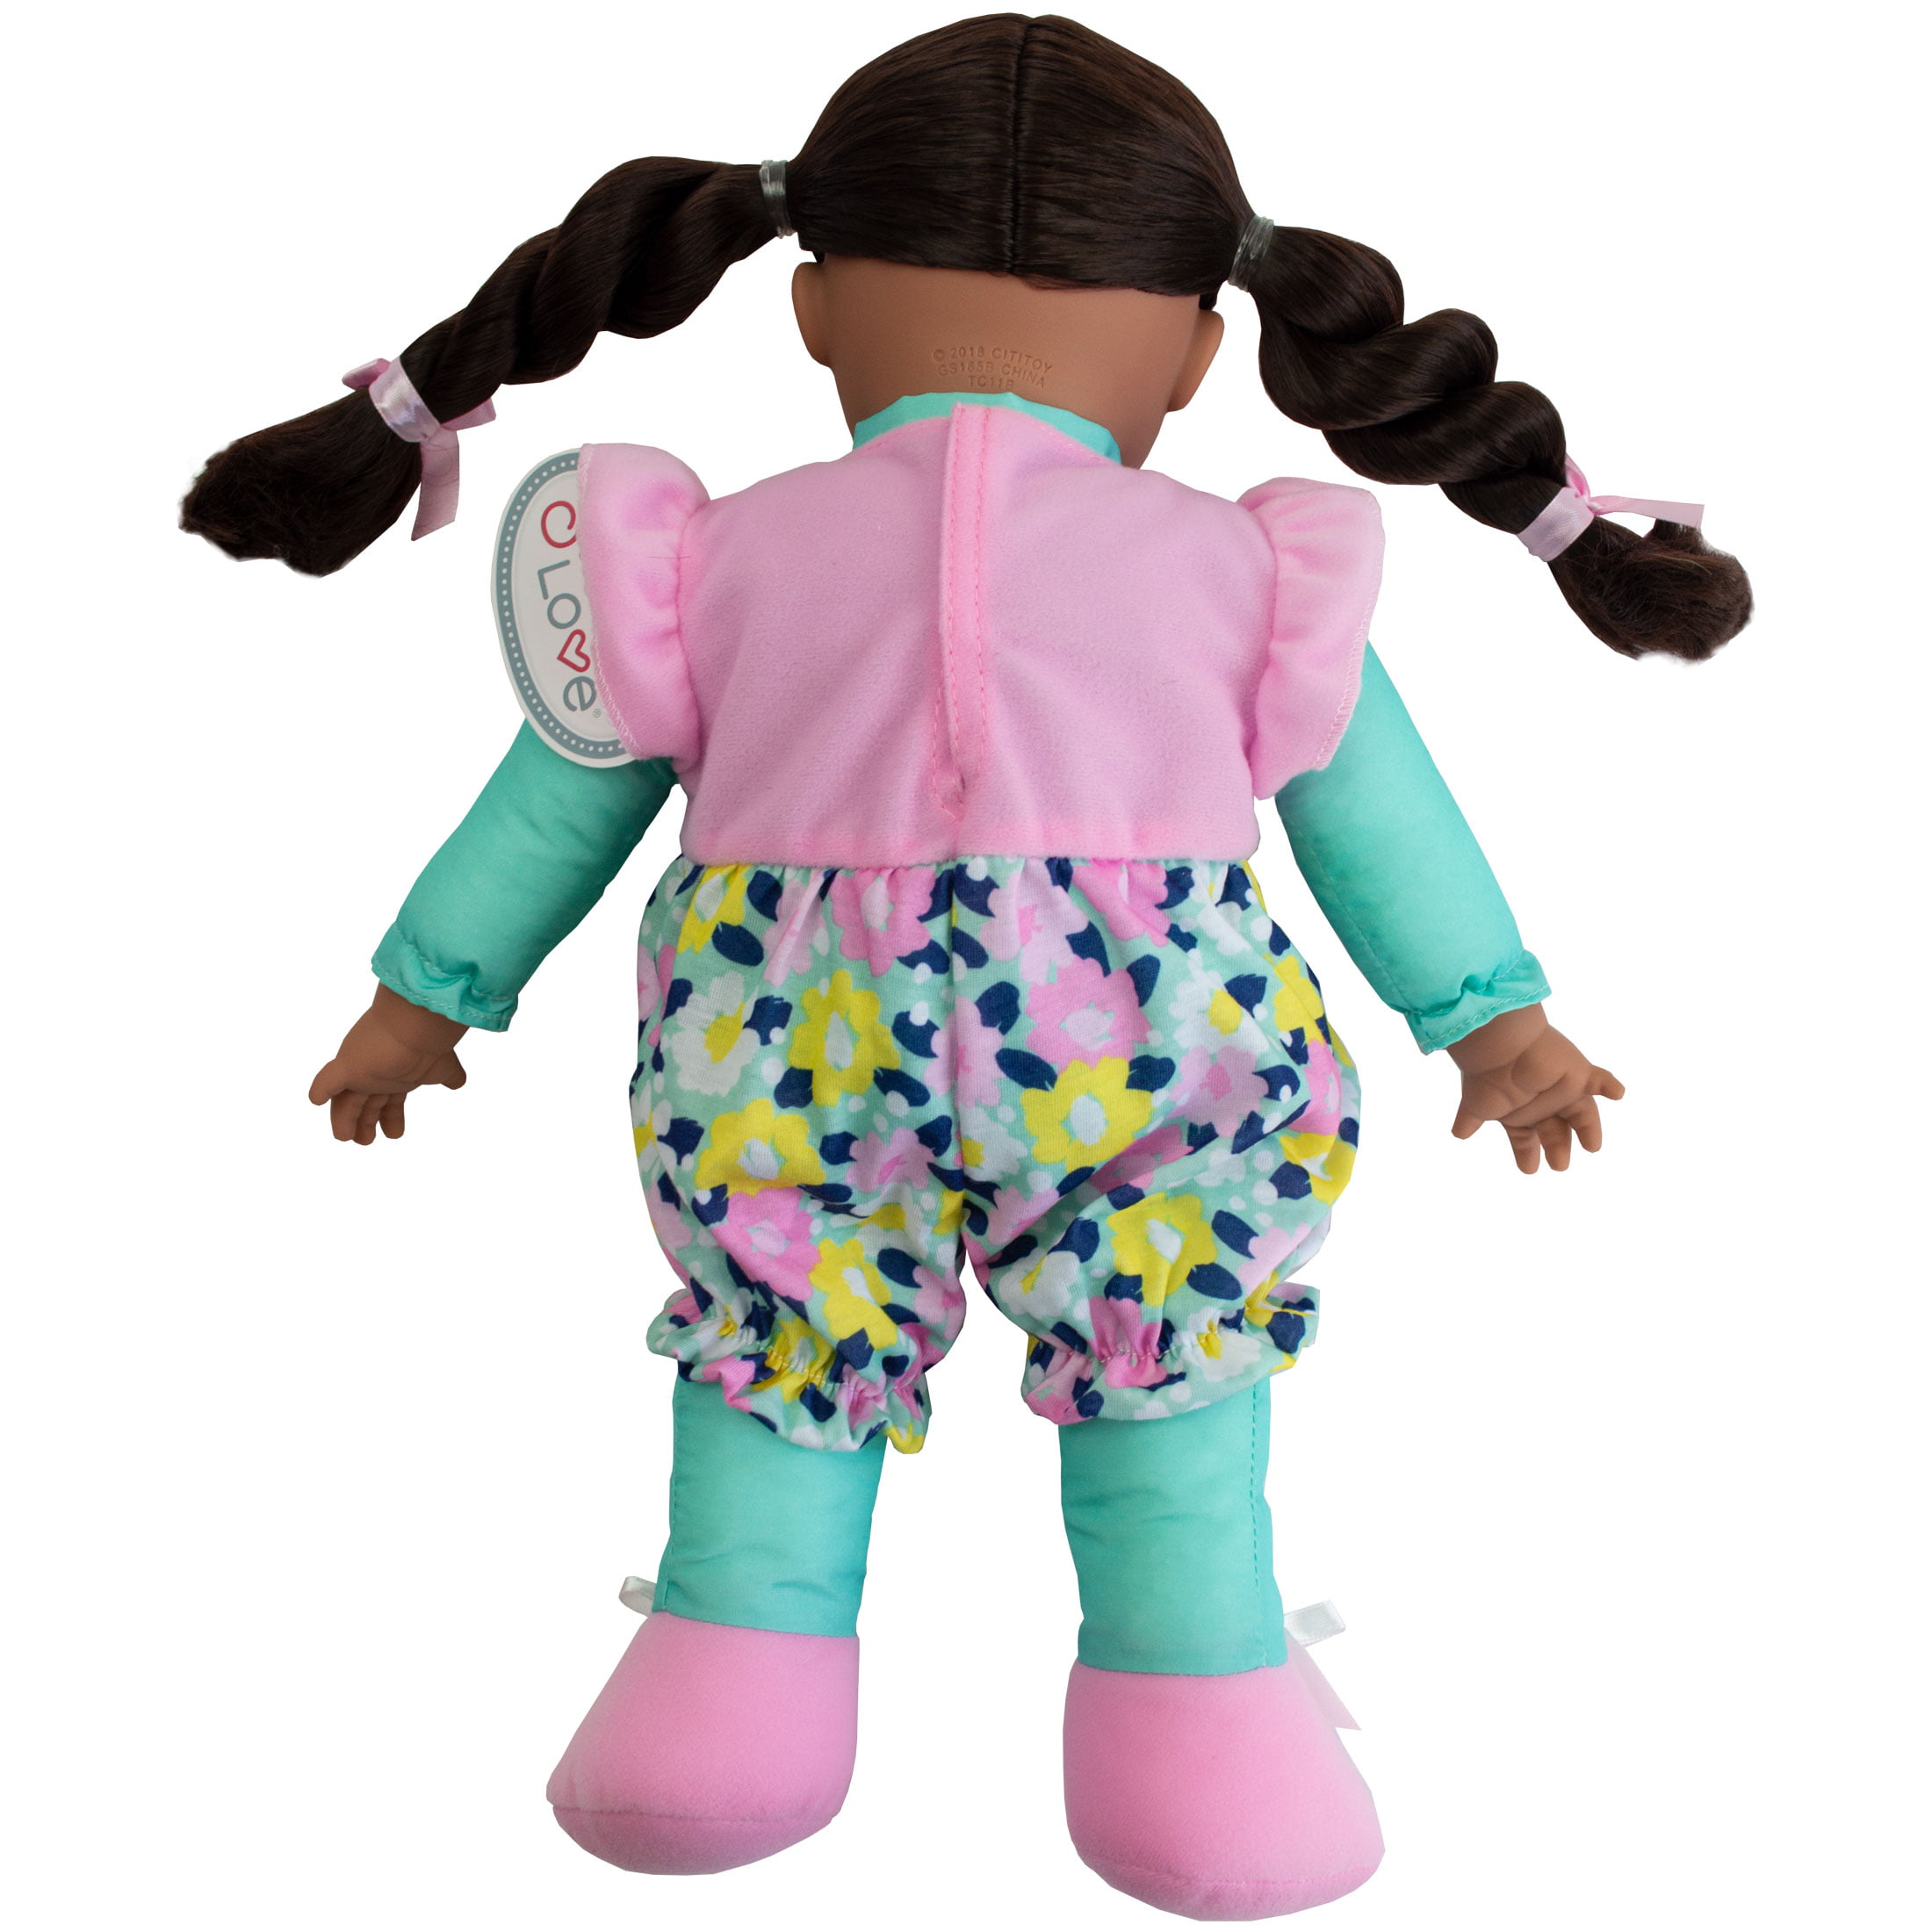 My Sweet Love 16-inch Soft-Body Toddler Doll, Dark Skin Tone, Pink Outfit 